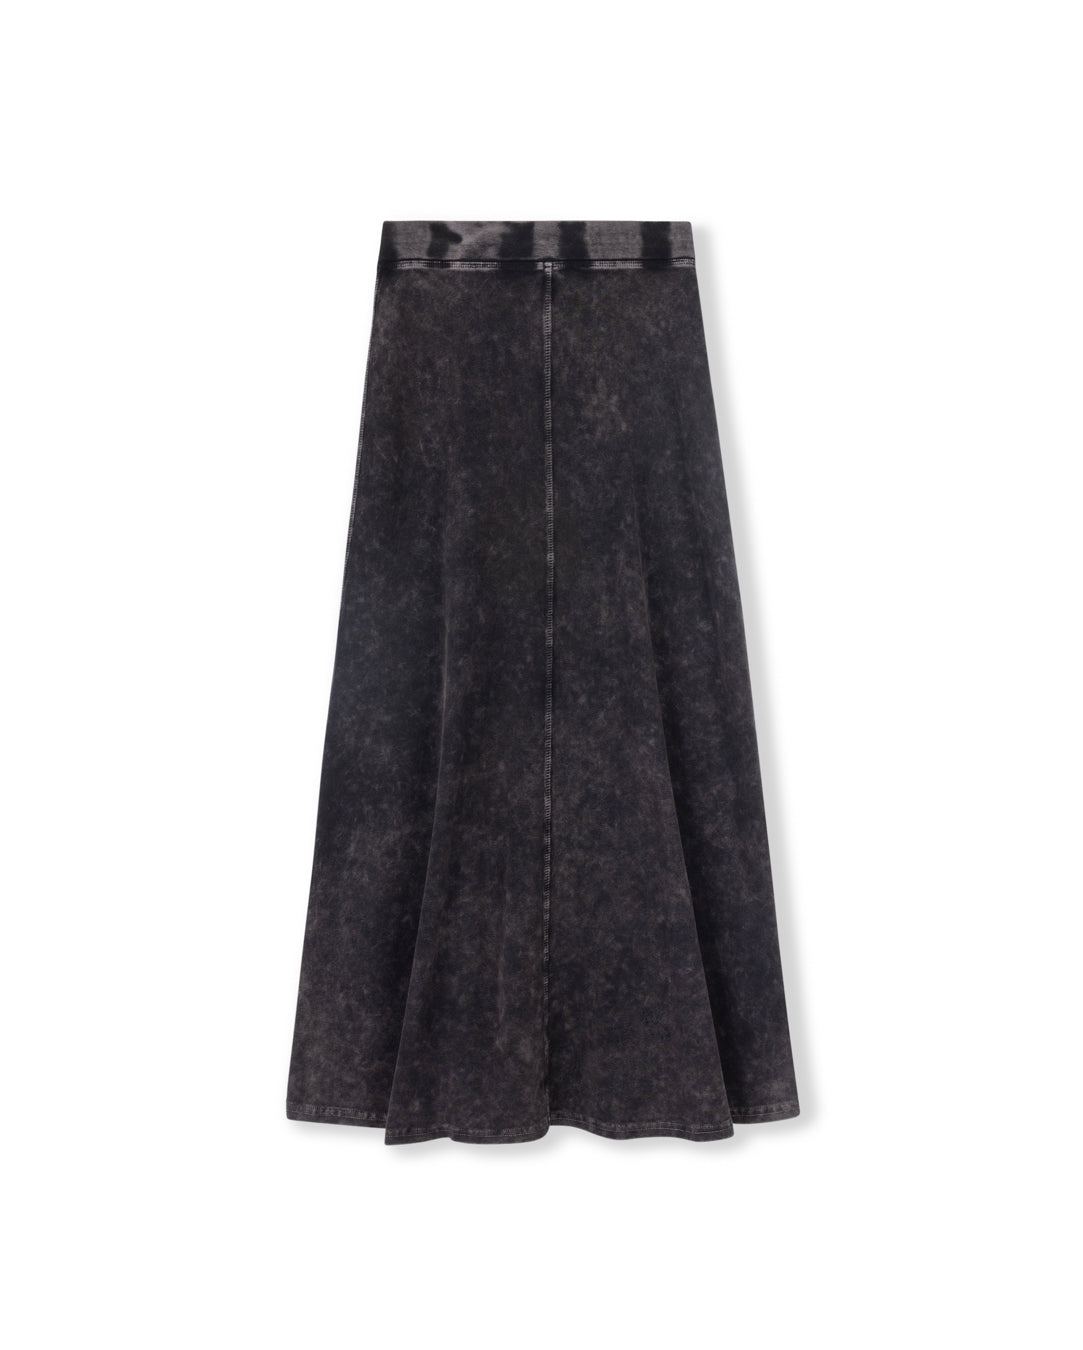 Mineral Wash A-line Maxi Skirt